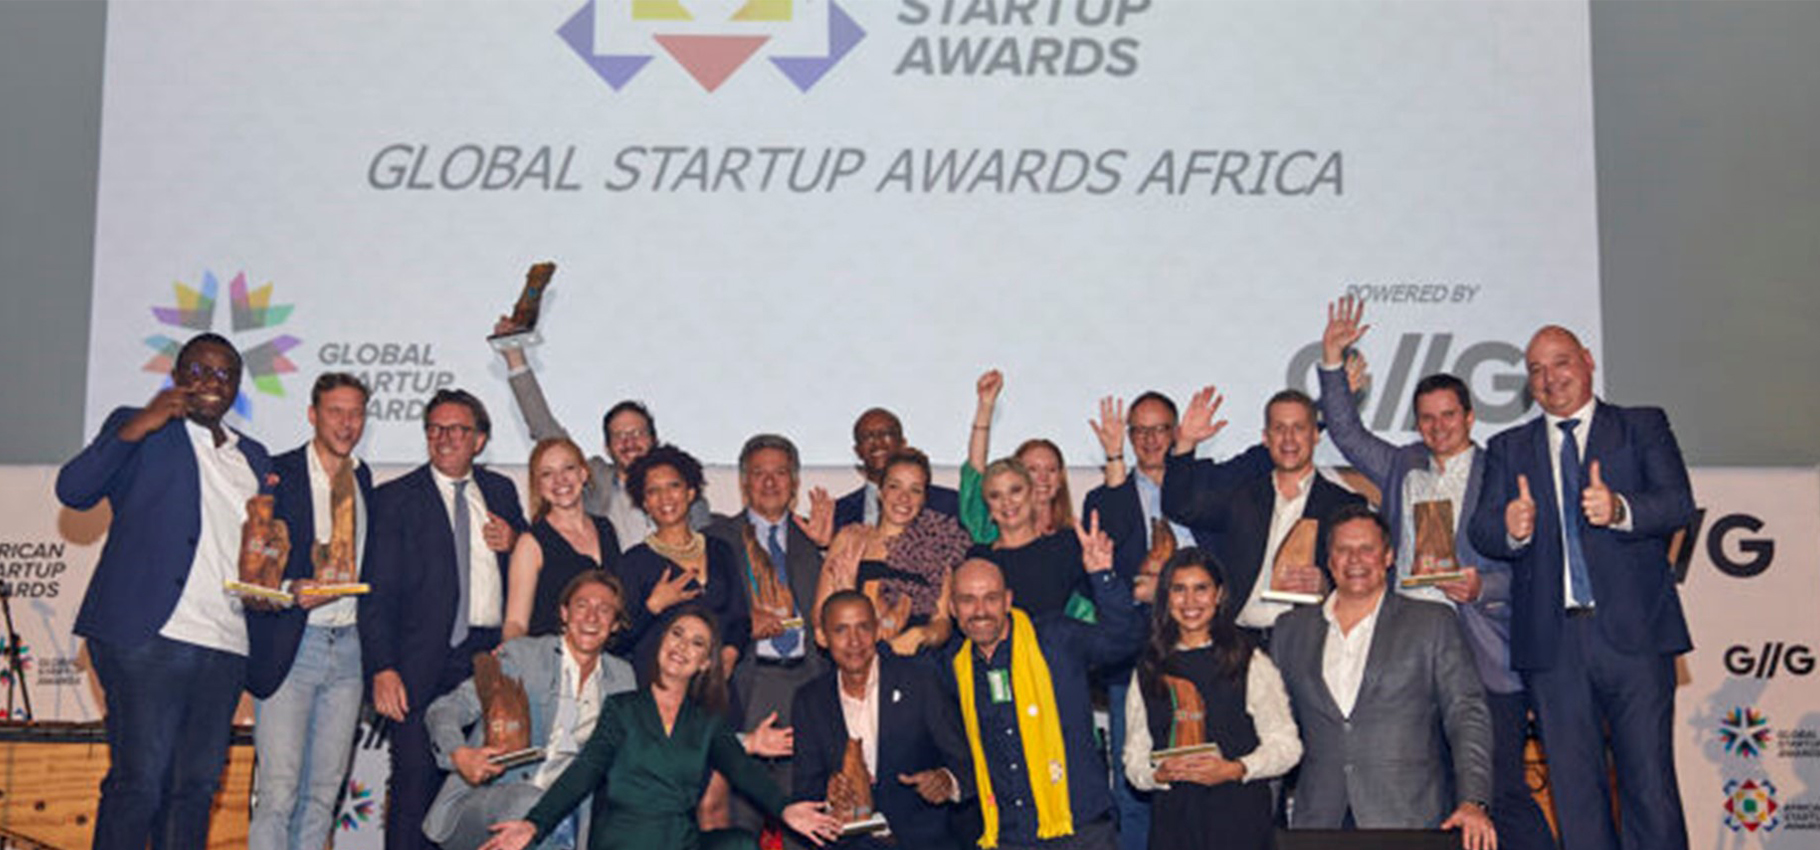 Applications open for Global Startups Awards Africa